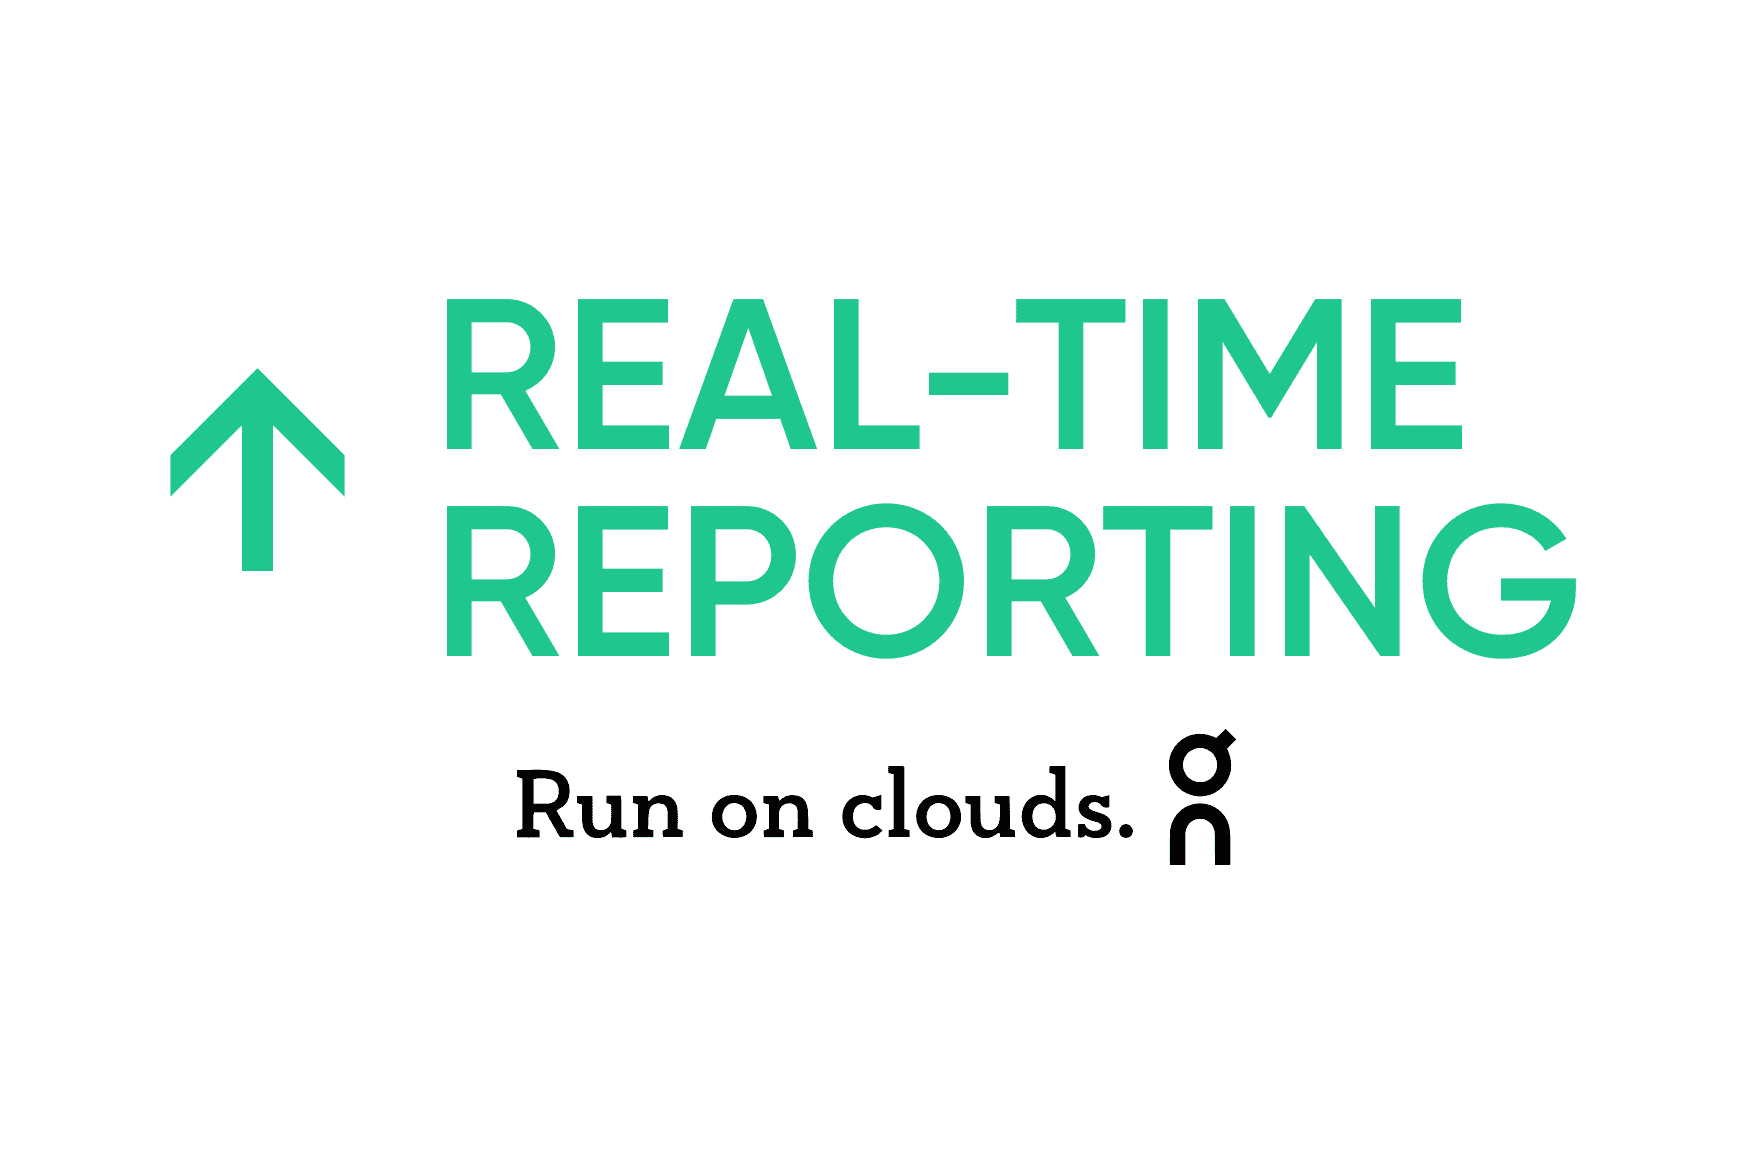 On: Improved real-time reporting